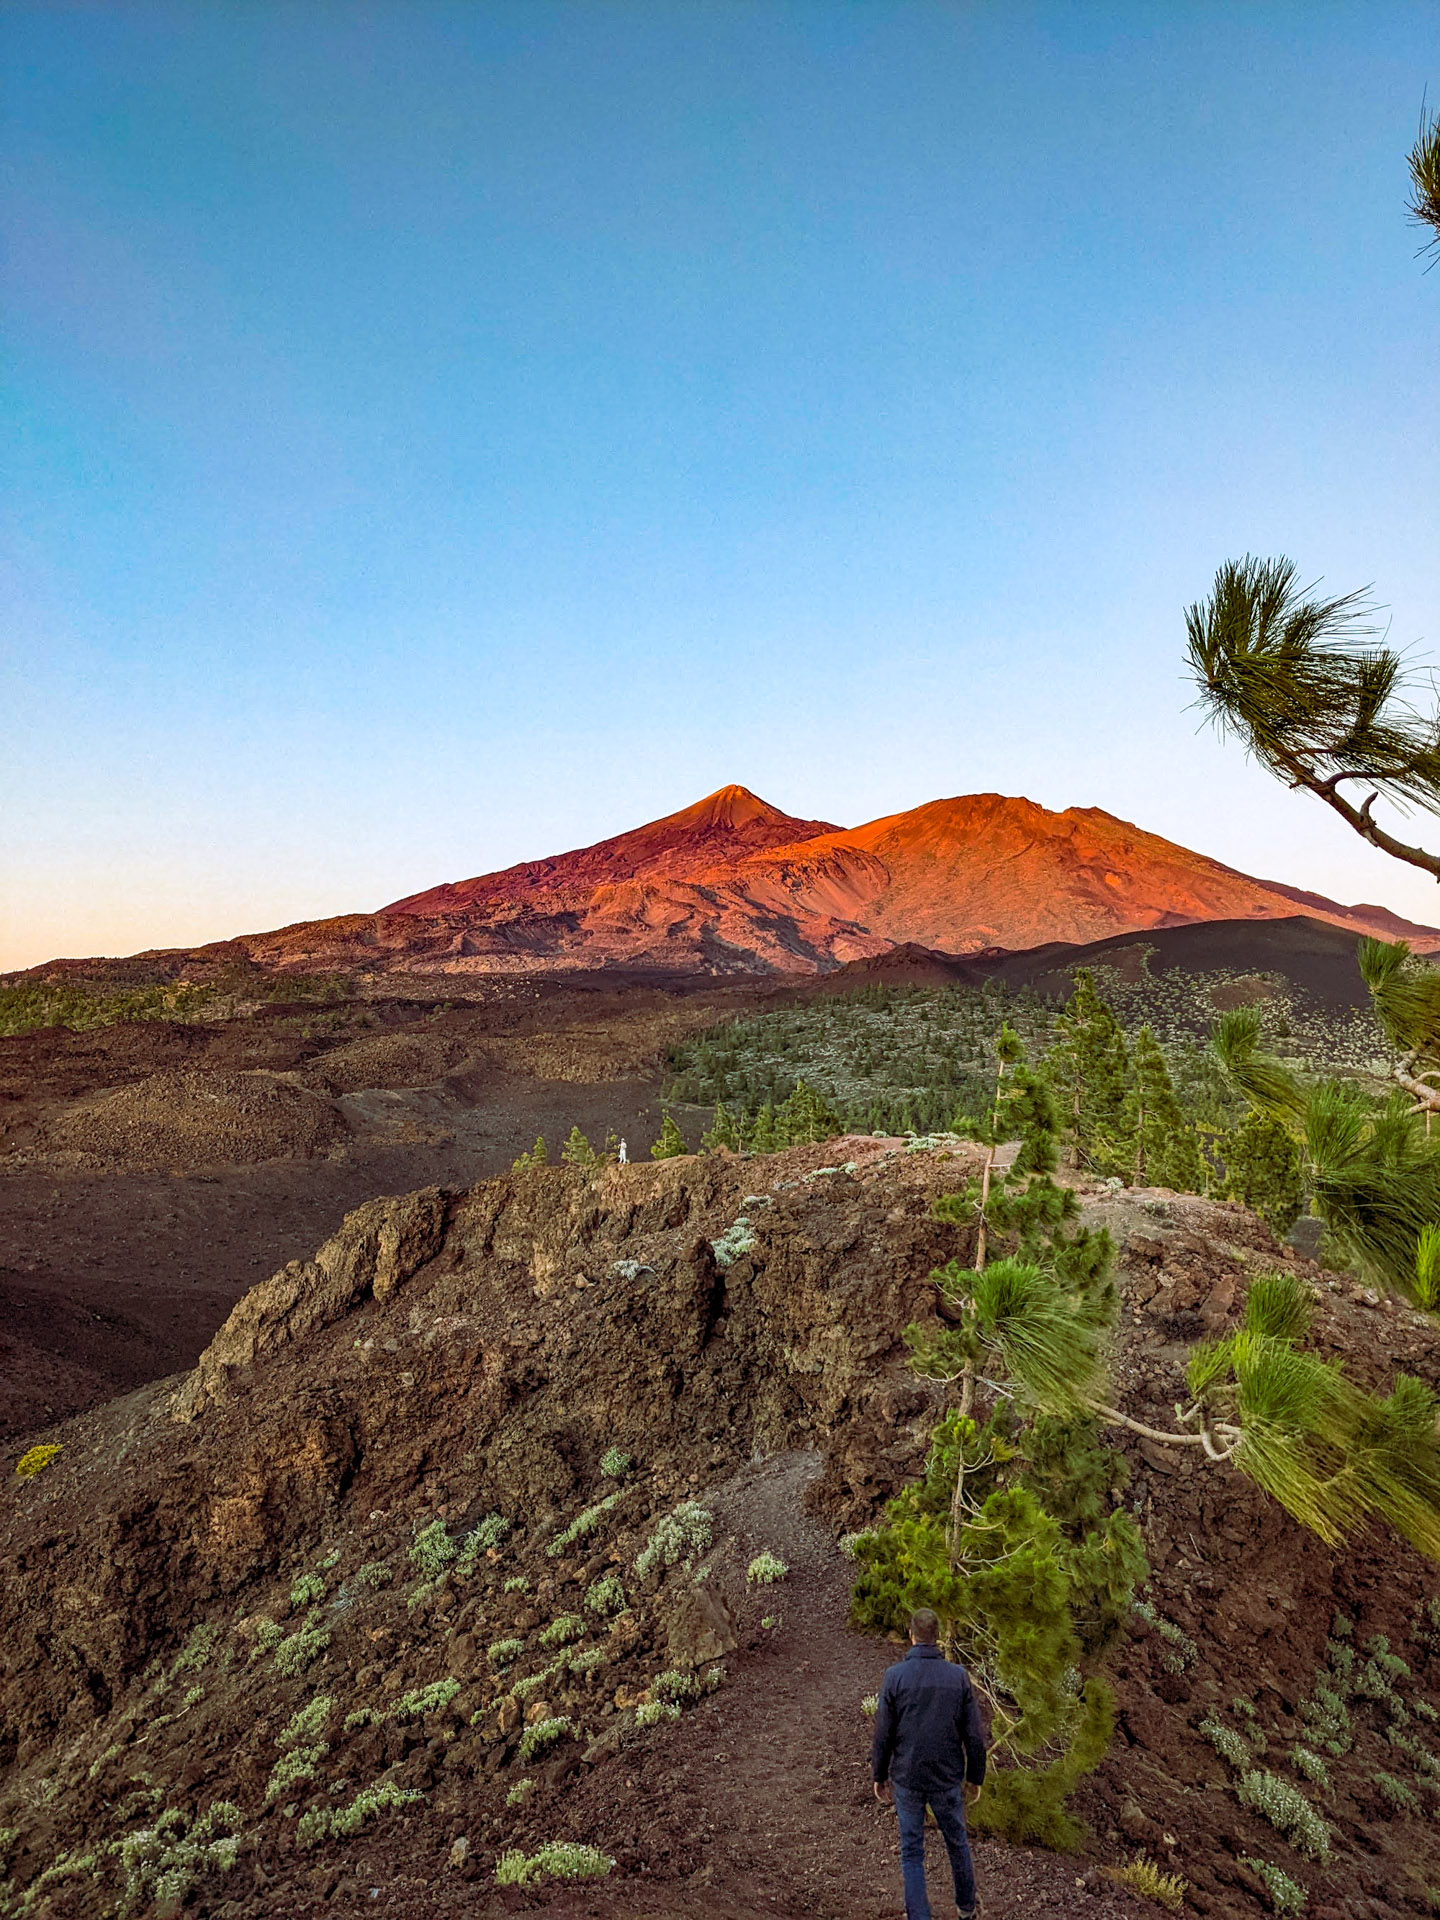 The path leading down the hill from the sunset view, with Teide glowing red in the background.